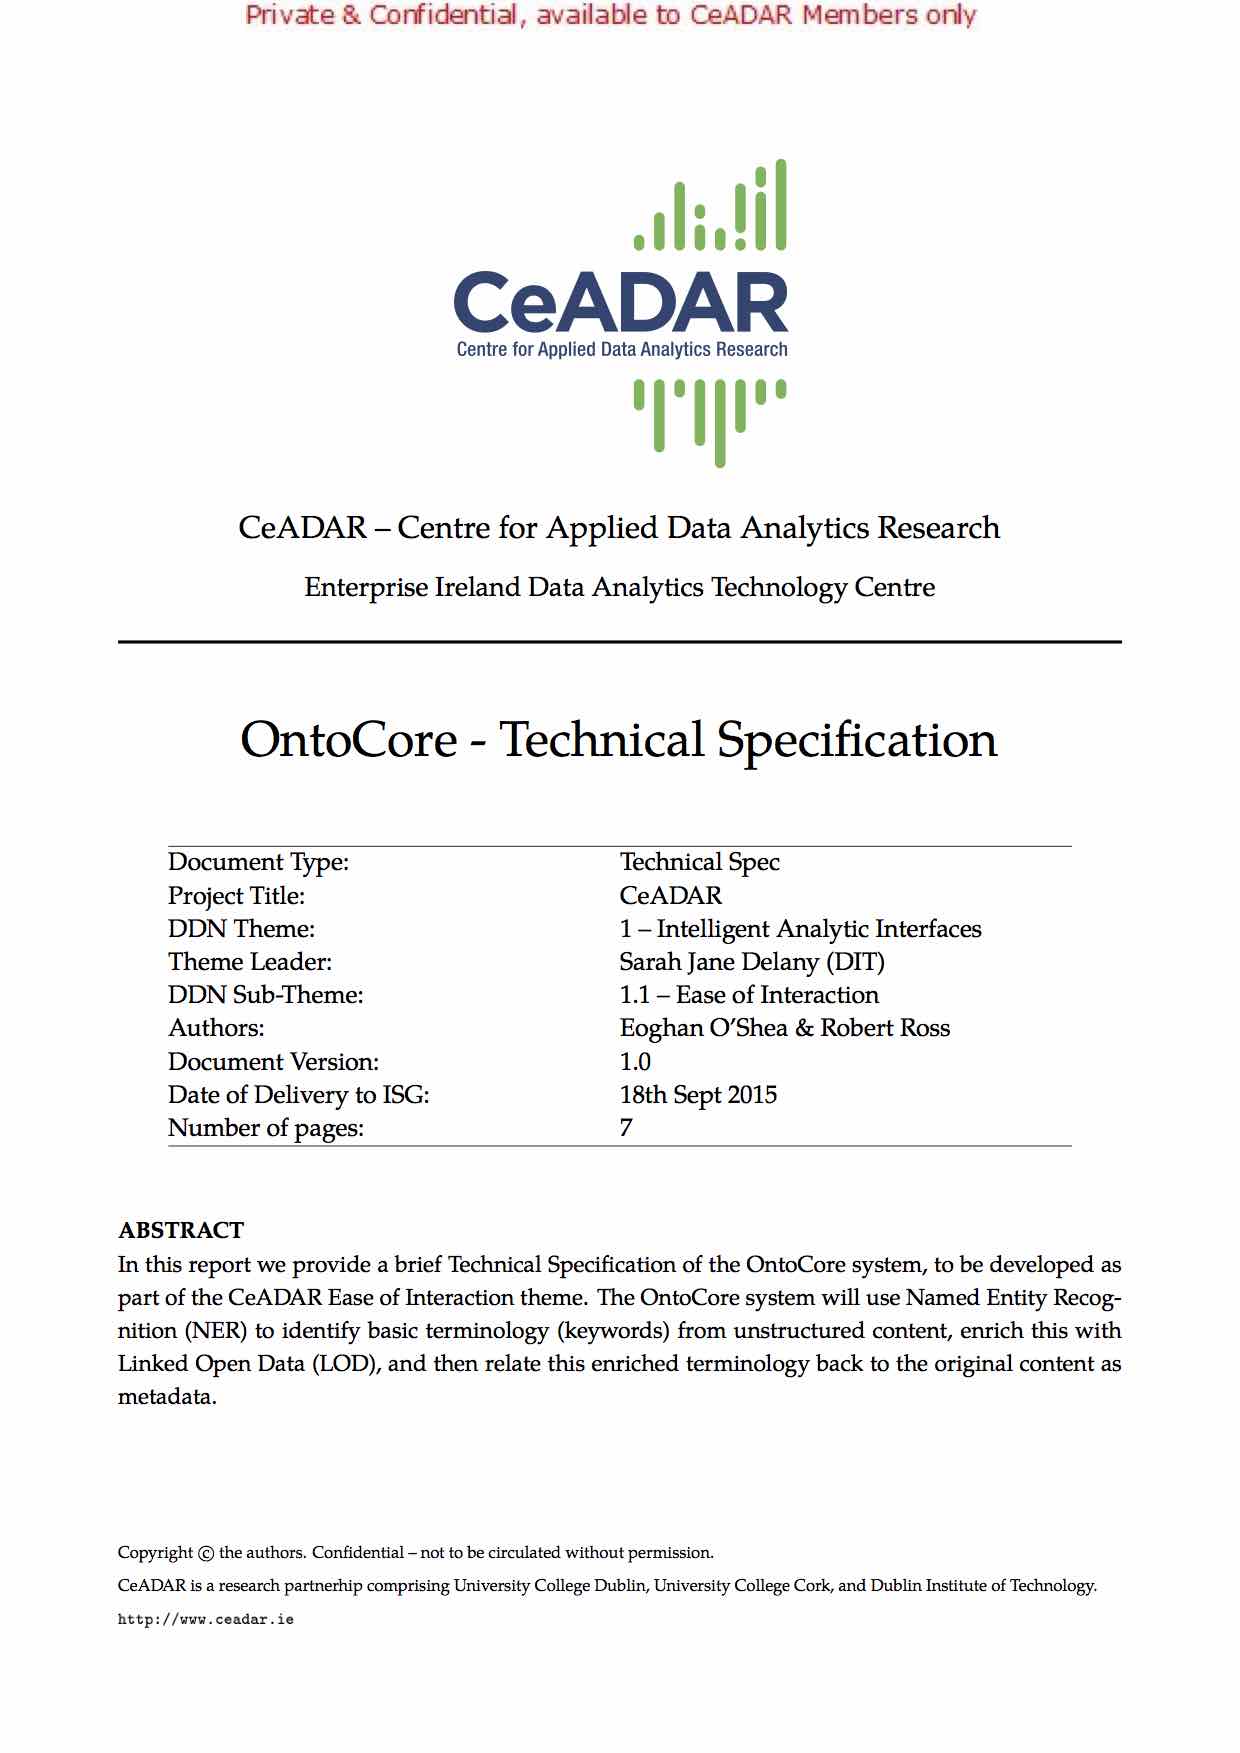 Technical Specification (PDF)